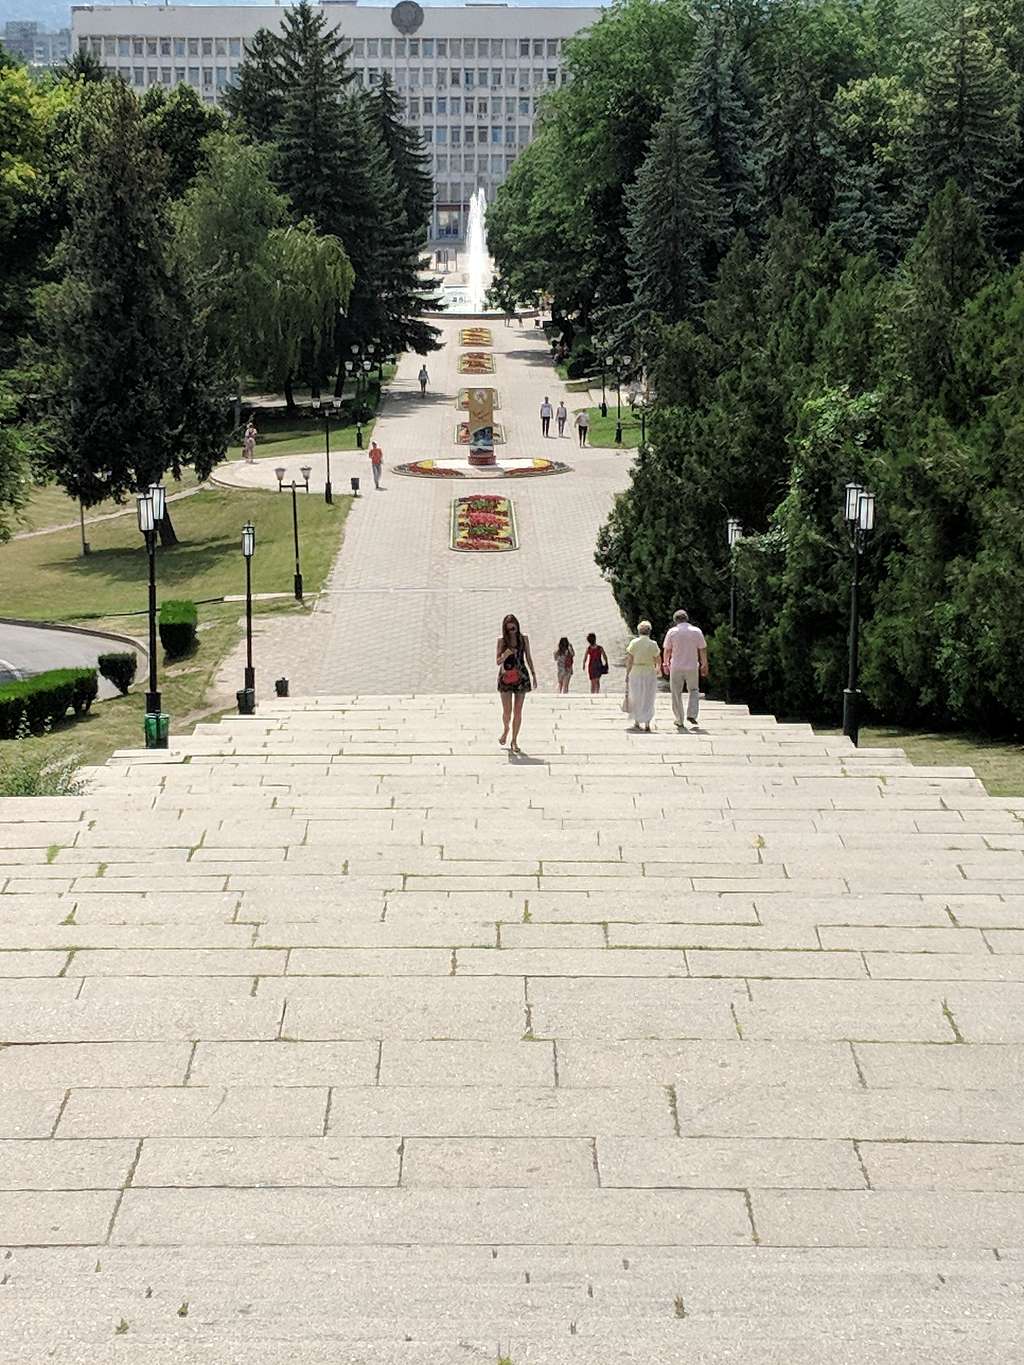 Looking west from Statue of Lenin